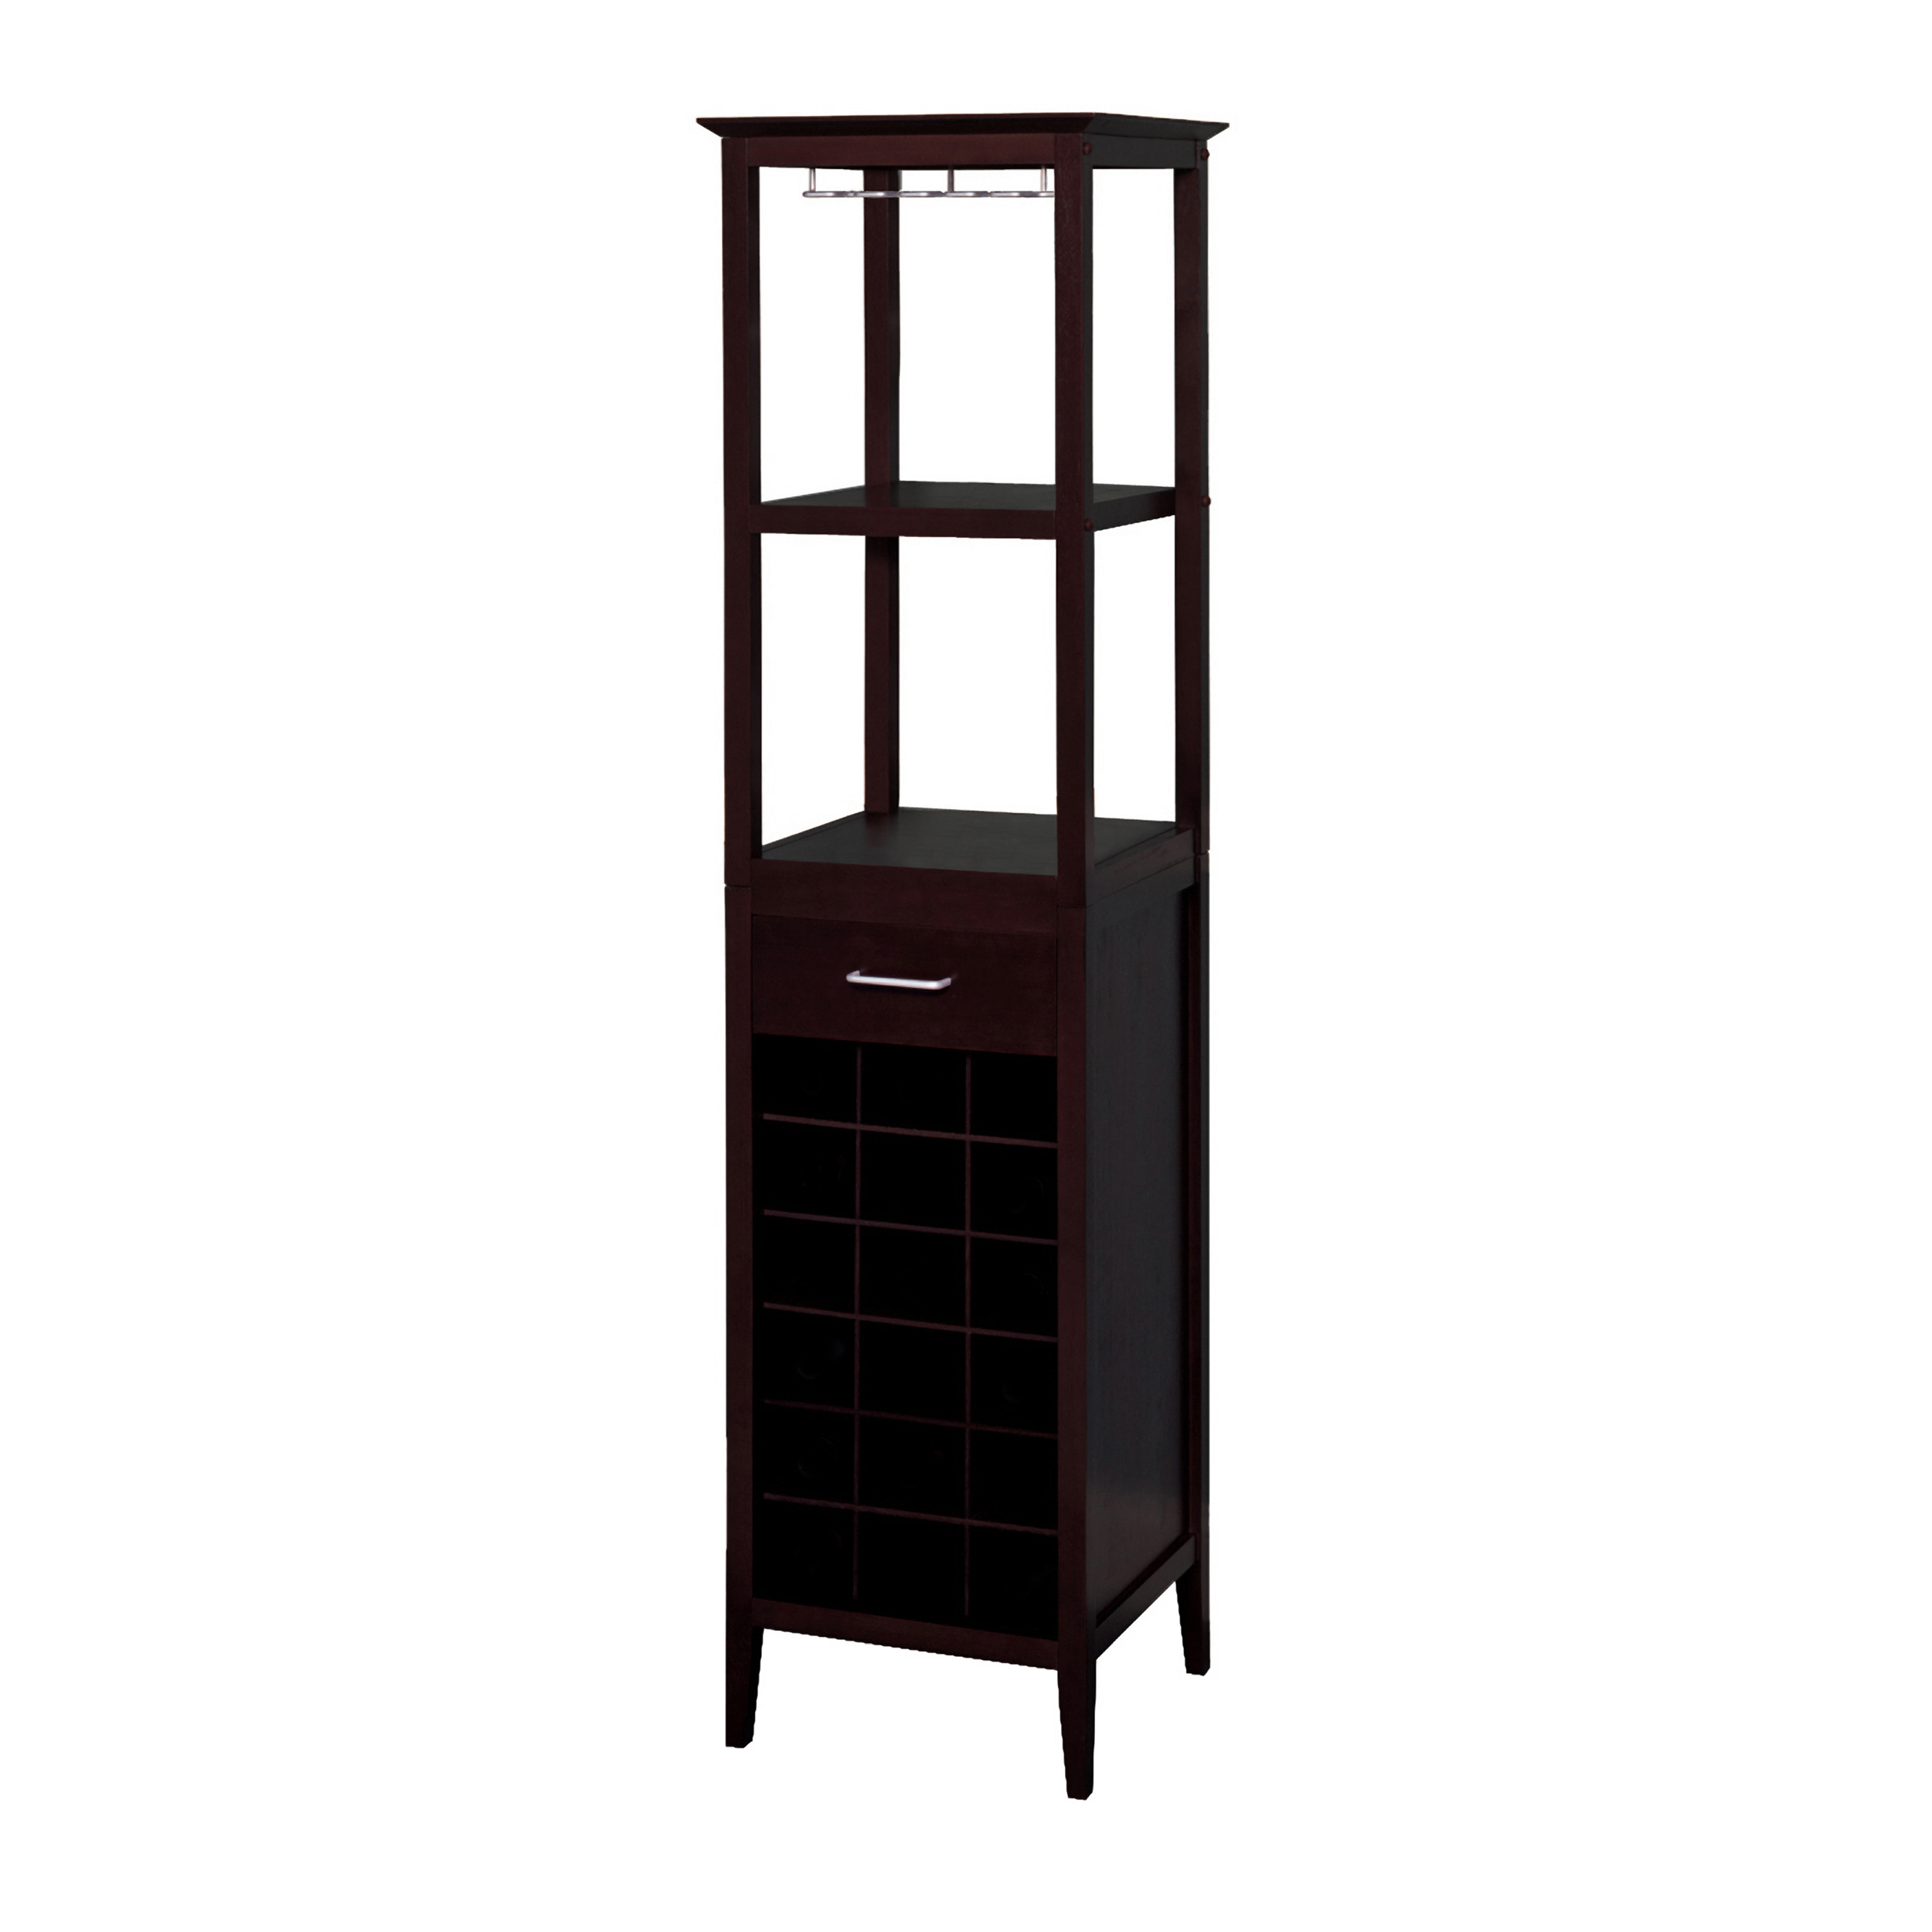 Winsome Wood Willis 18-Bottle Wine Tower With Rack and Shelves, Espresso Finish - image 4 of 4